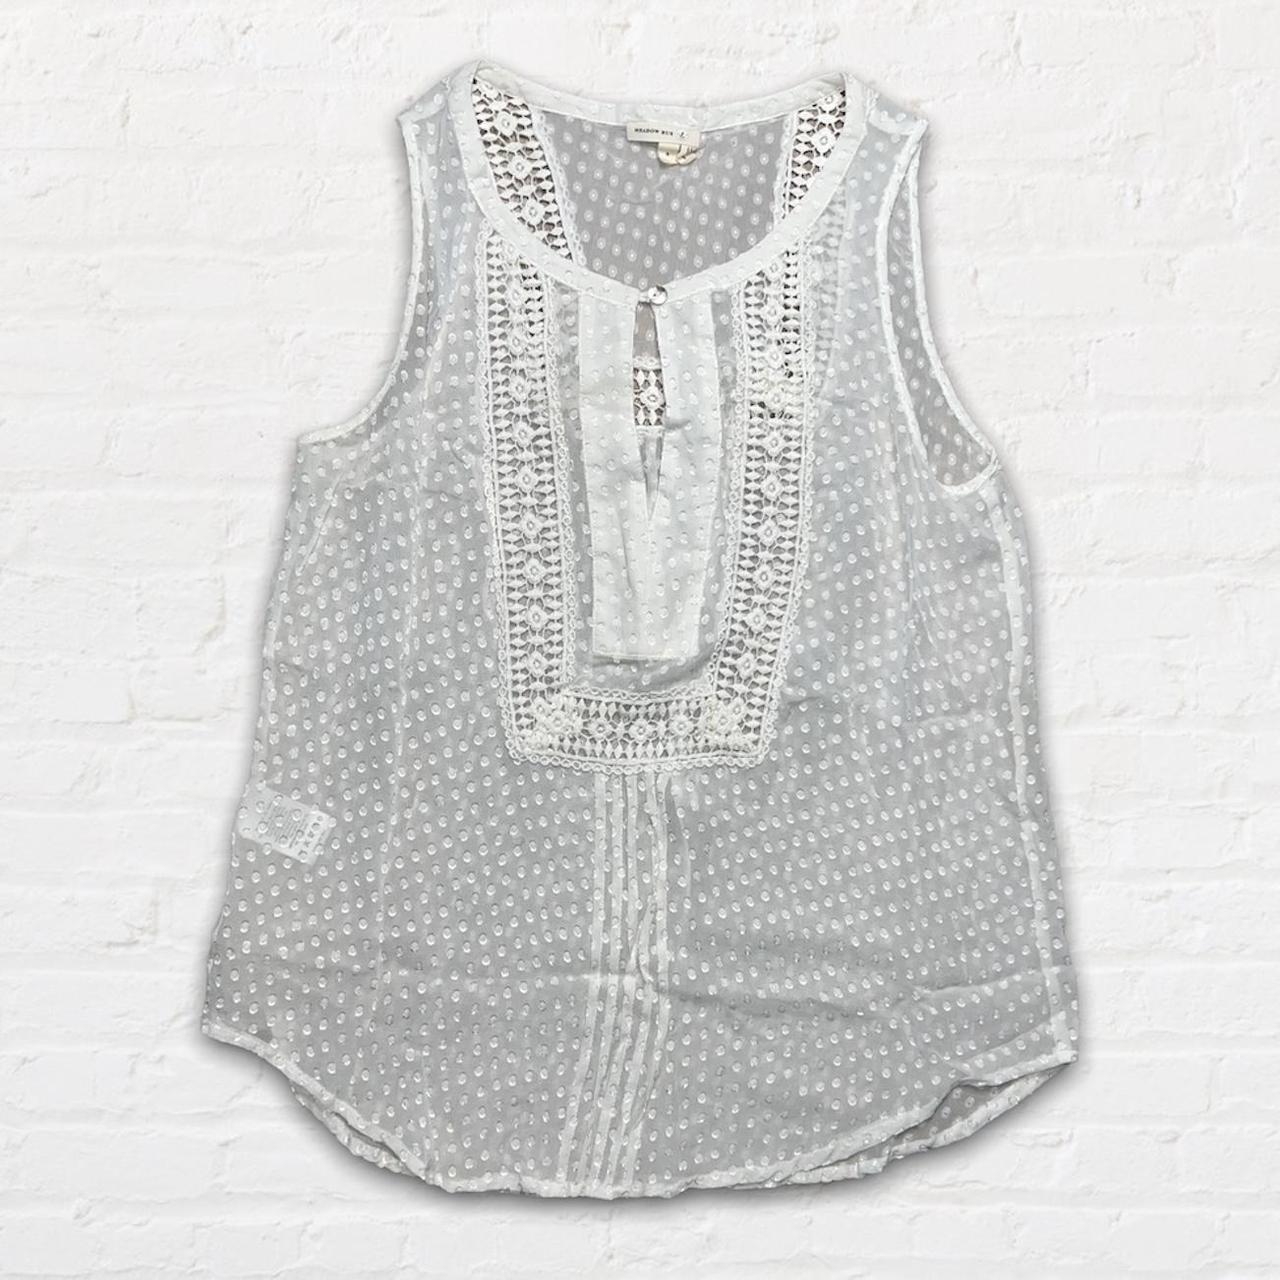 Product Image 1 - Anthropologie Meadow Rue Tank Top

-